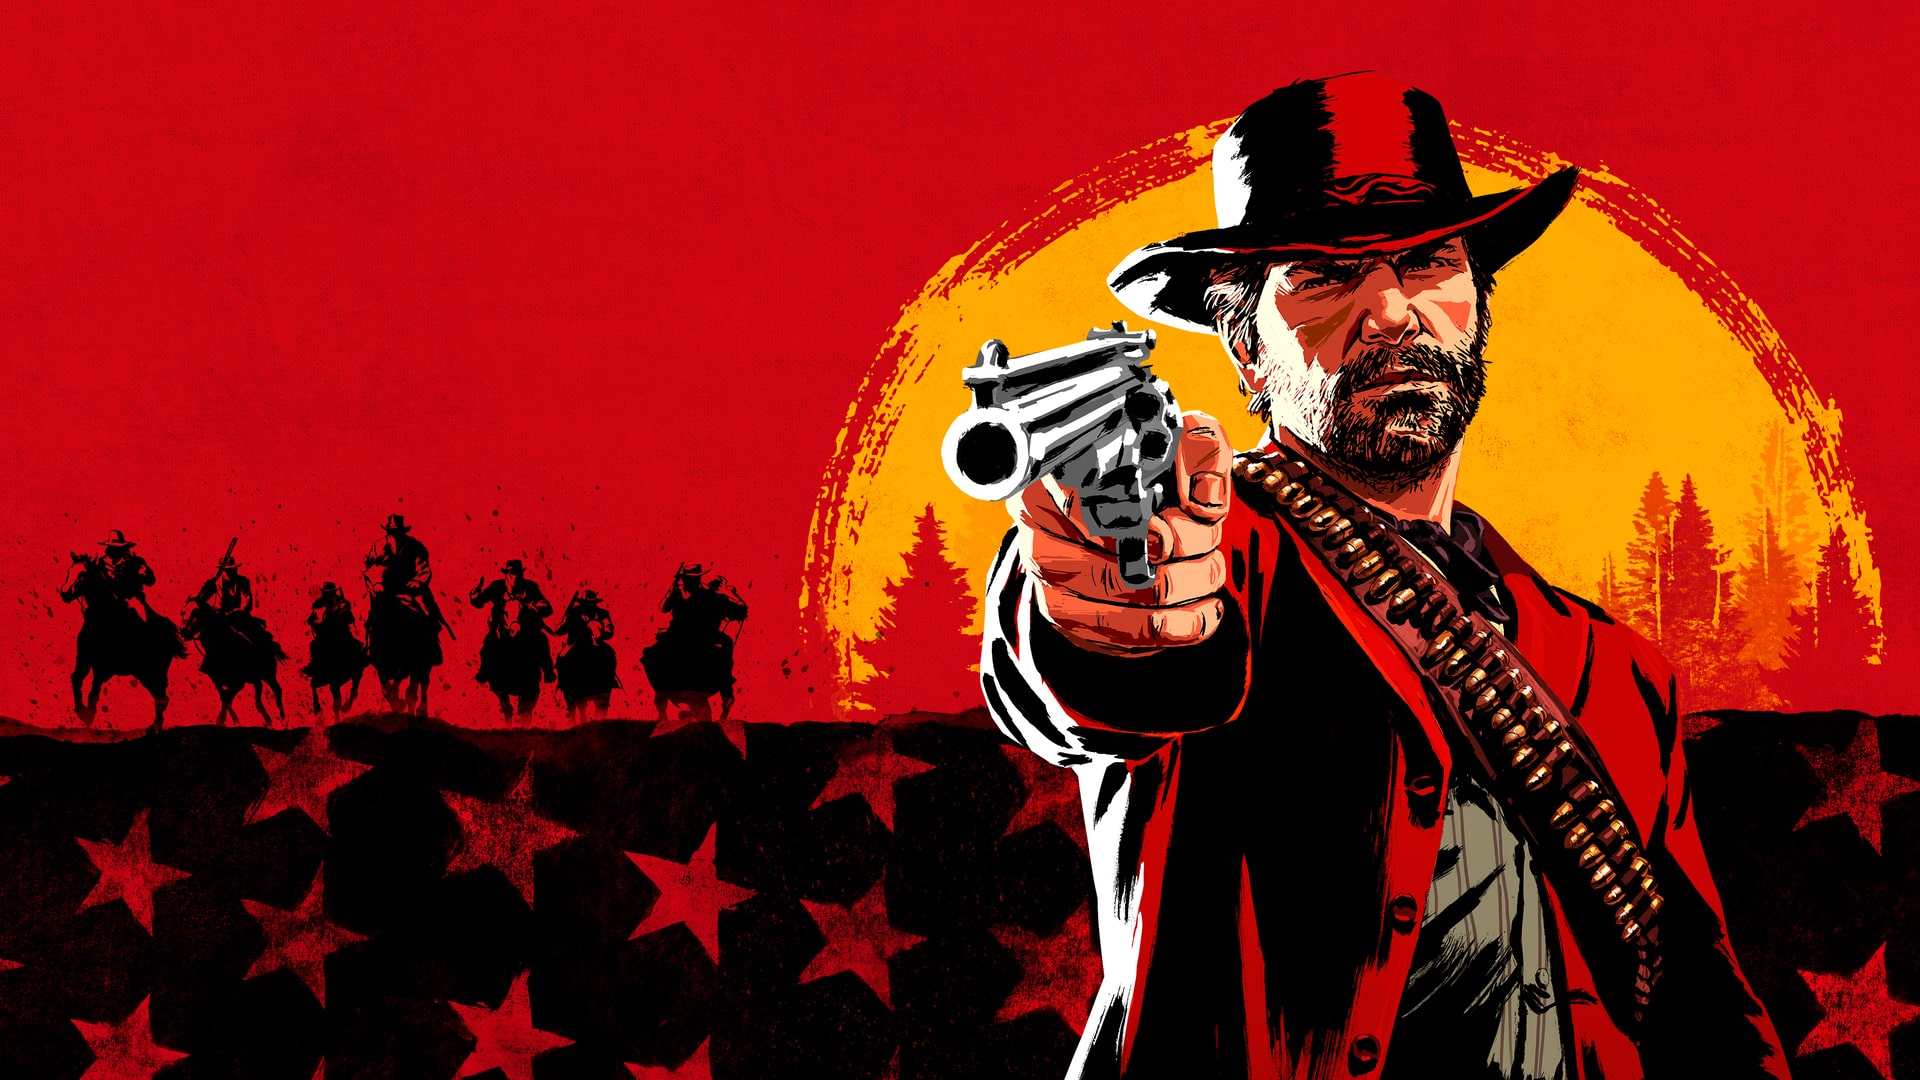 red redemption 2 ps4 price